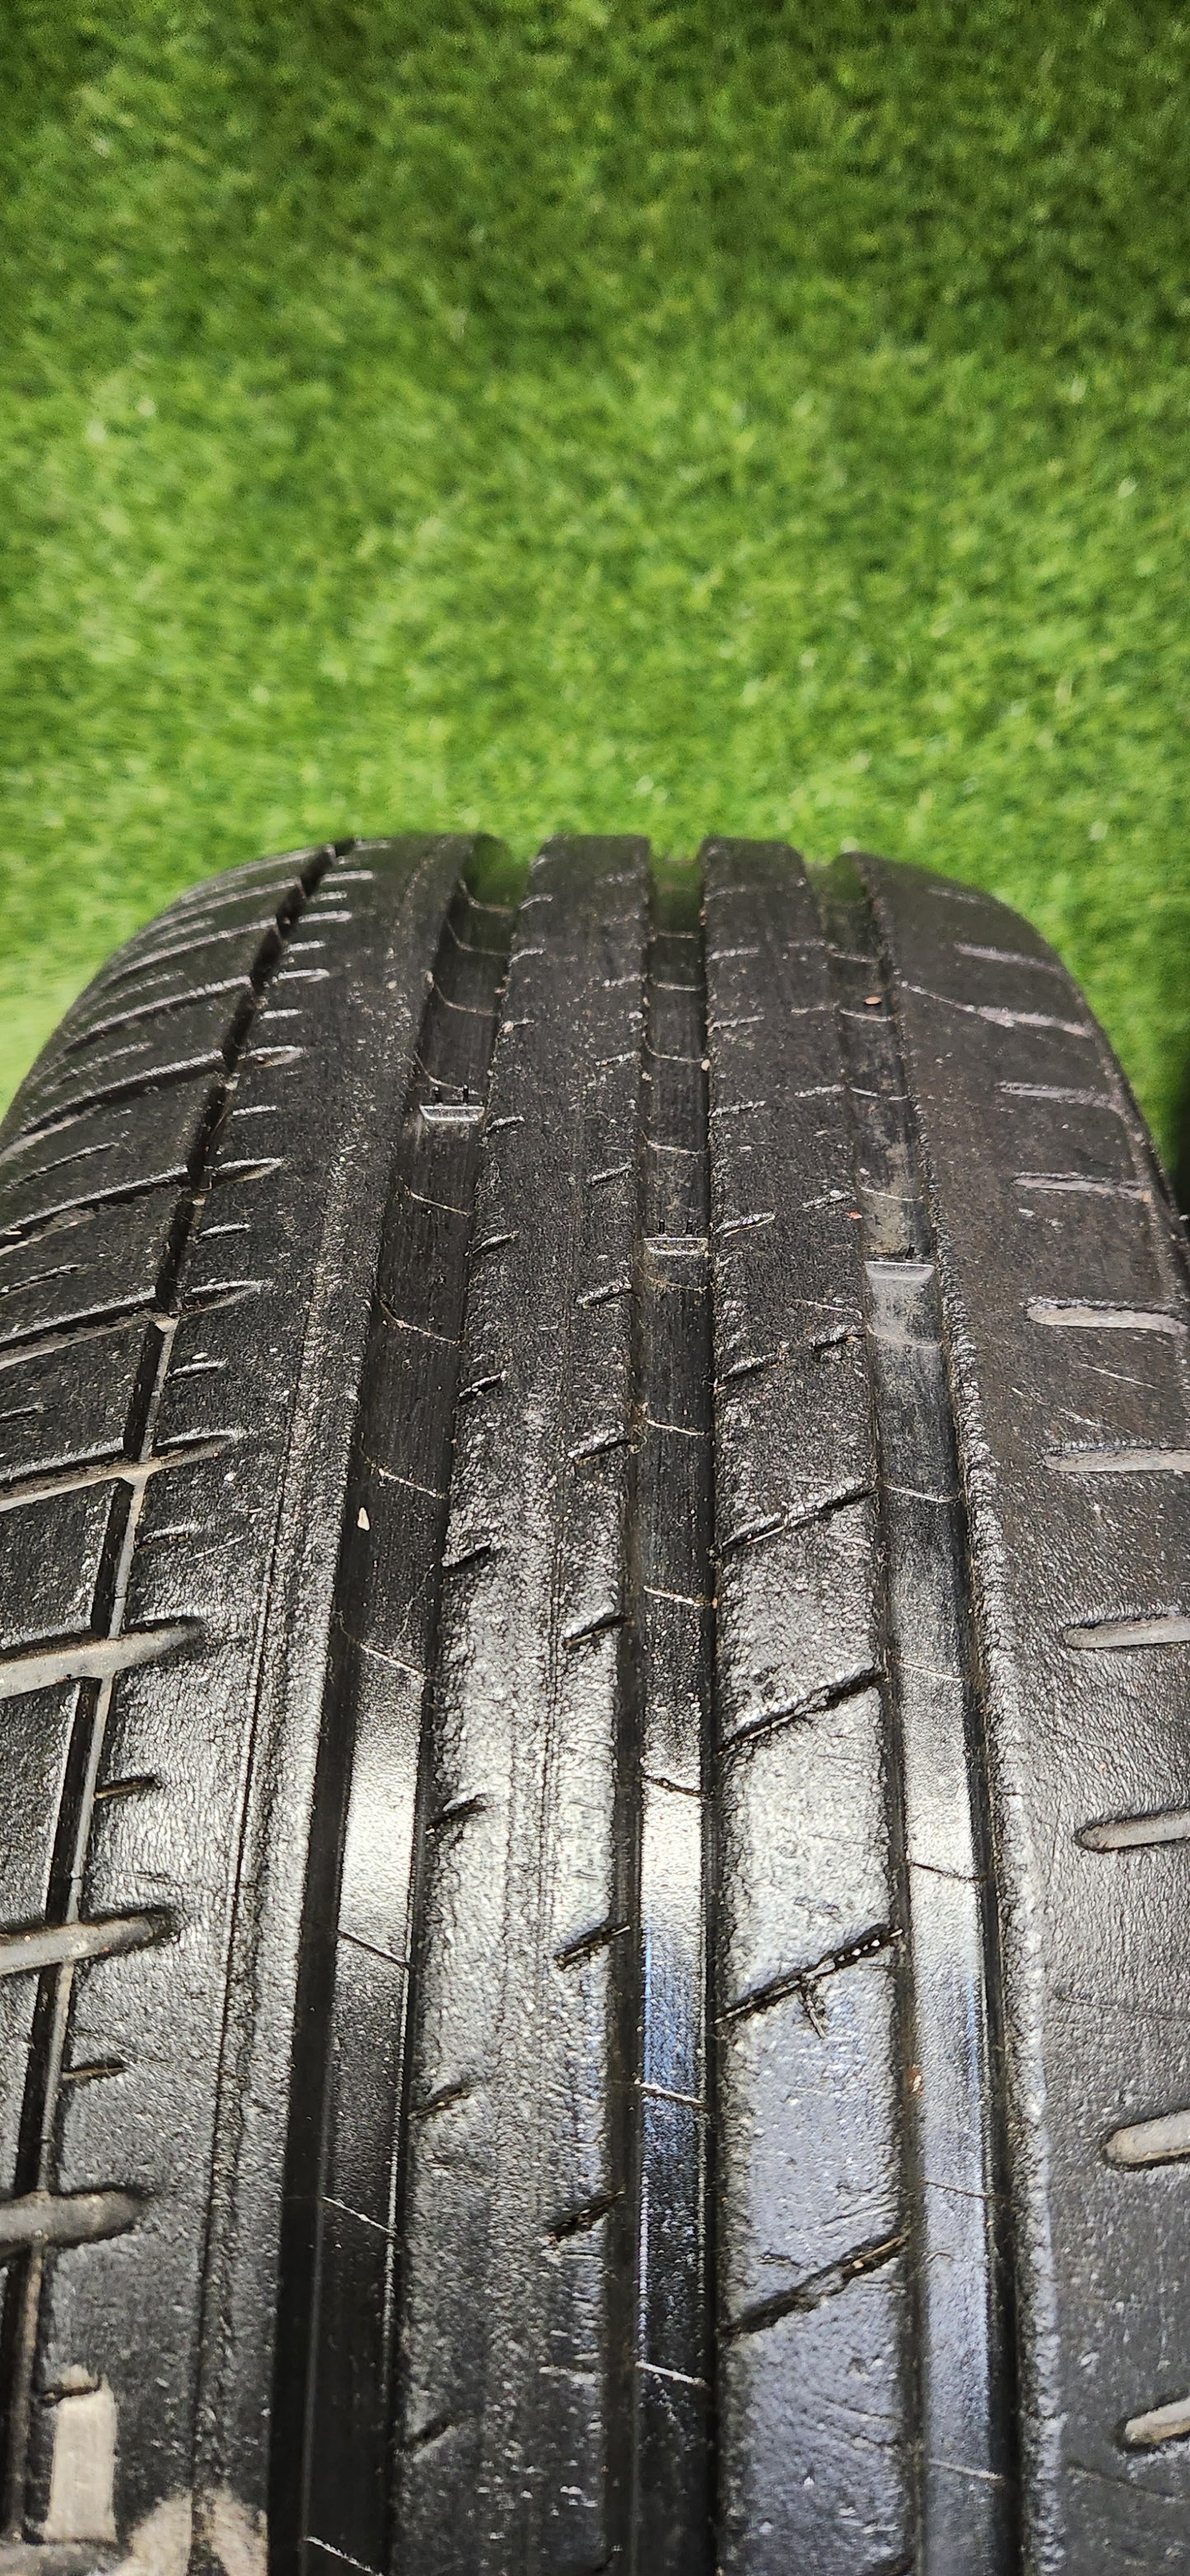 Michelin Pilot Sport 3 195/50/R15 - Track use only Set Of 4?